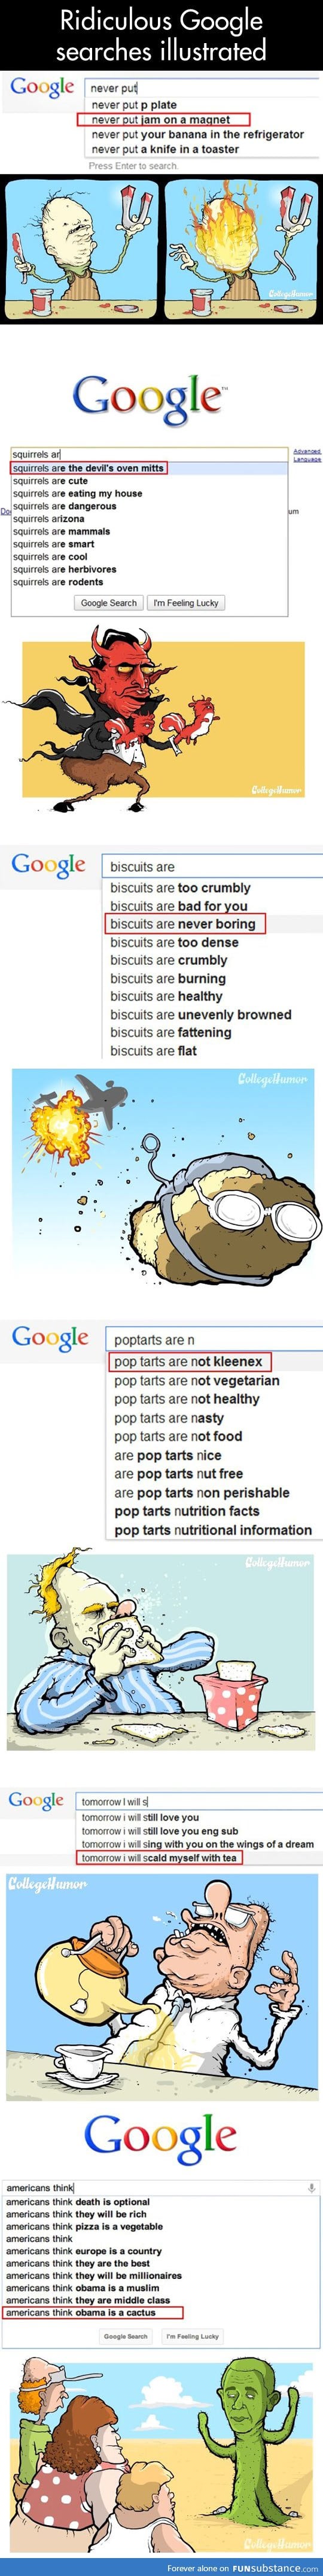 Ridiculous Google searches illustrated